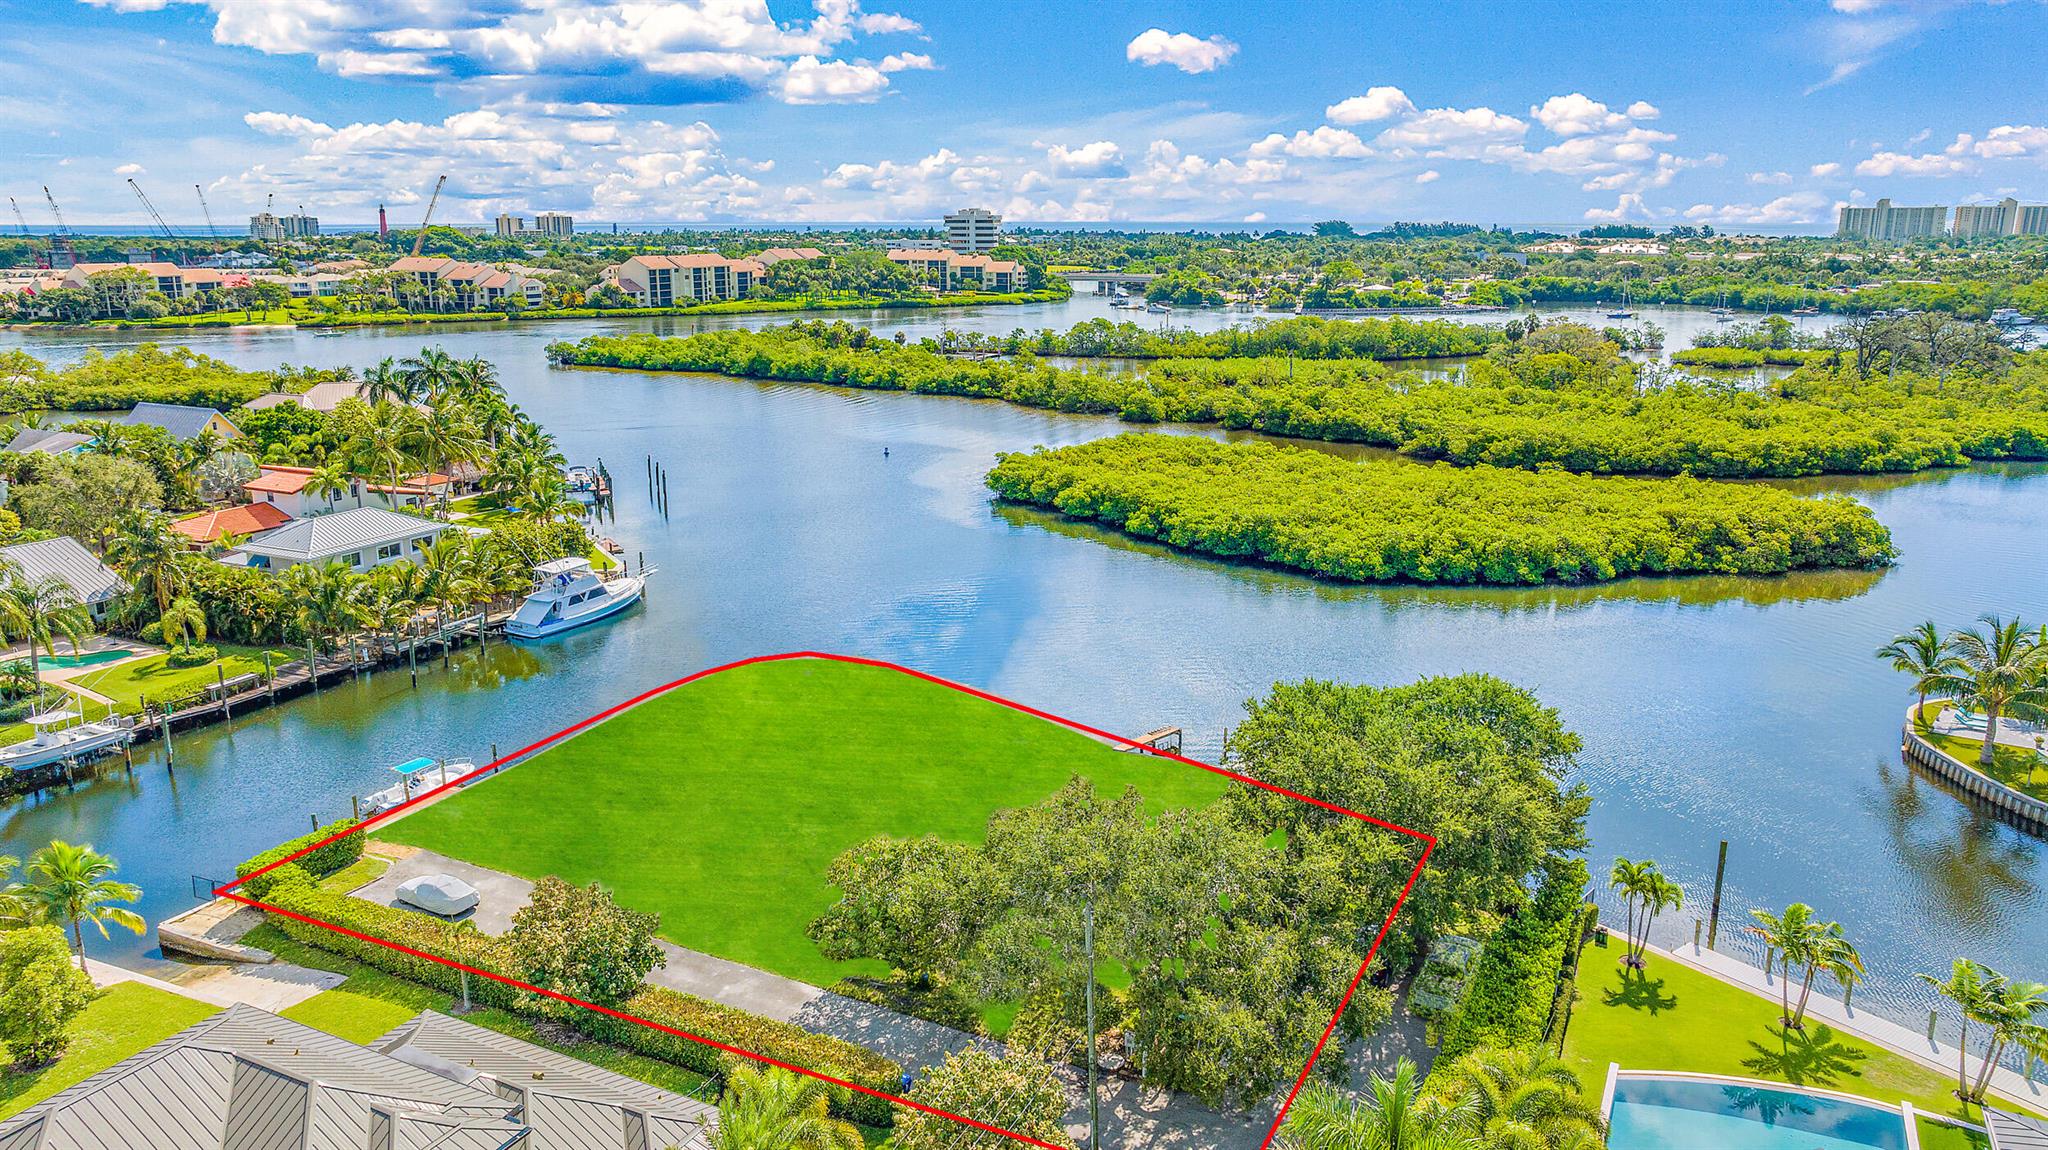 Exceptional Waterfront Opportunity East of the Brightline Corridor. This unique offering combines three separate parcels into a sprawling waterfront property, allowing for your creative vision.Situated on a generously sized corner lot, spanning approximately half an acre, this remarkable property features an impressive 300 feet of water frontage. Boasting deep water access without any fixed bridges and located to the East of the railroad tracks, it serves as an unobstructed gateway to the glistening waters of Jupiter, creating an idyllic haven for boating enthusiasts.With a picturesque vista overlooking a pristine preserve area, this lot ensures unblemished views and an ambiance of serene seclusion, making it an ideal setting for an opulent estate or a development opportunity.